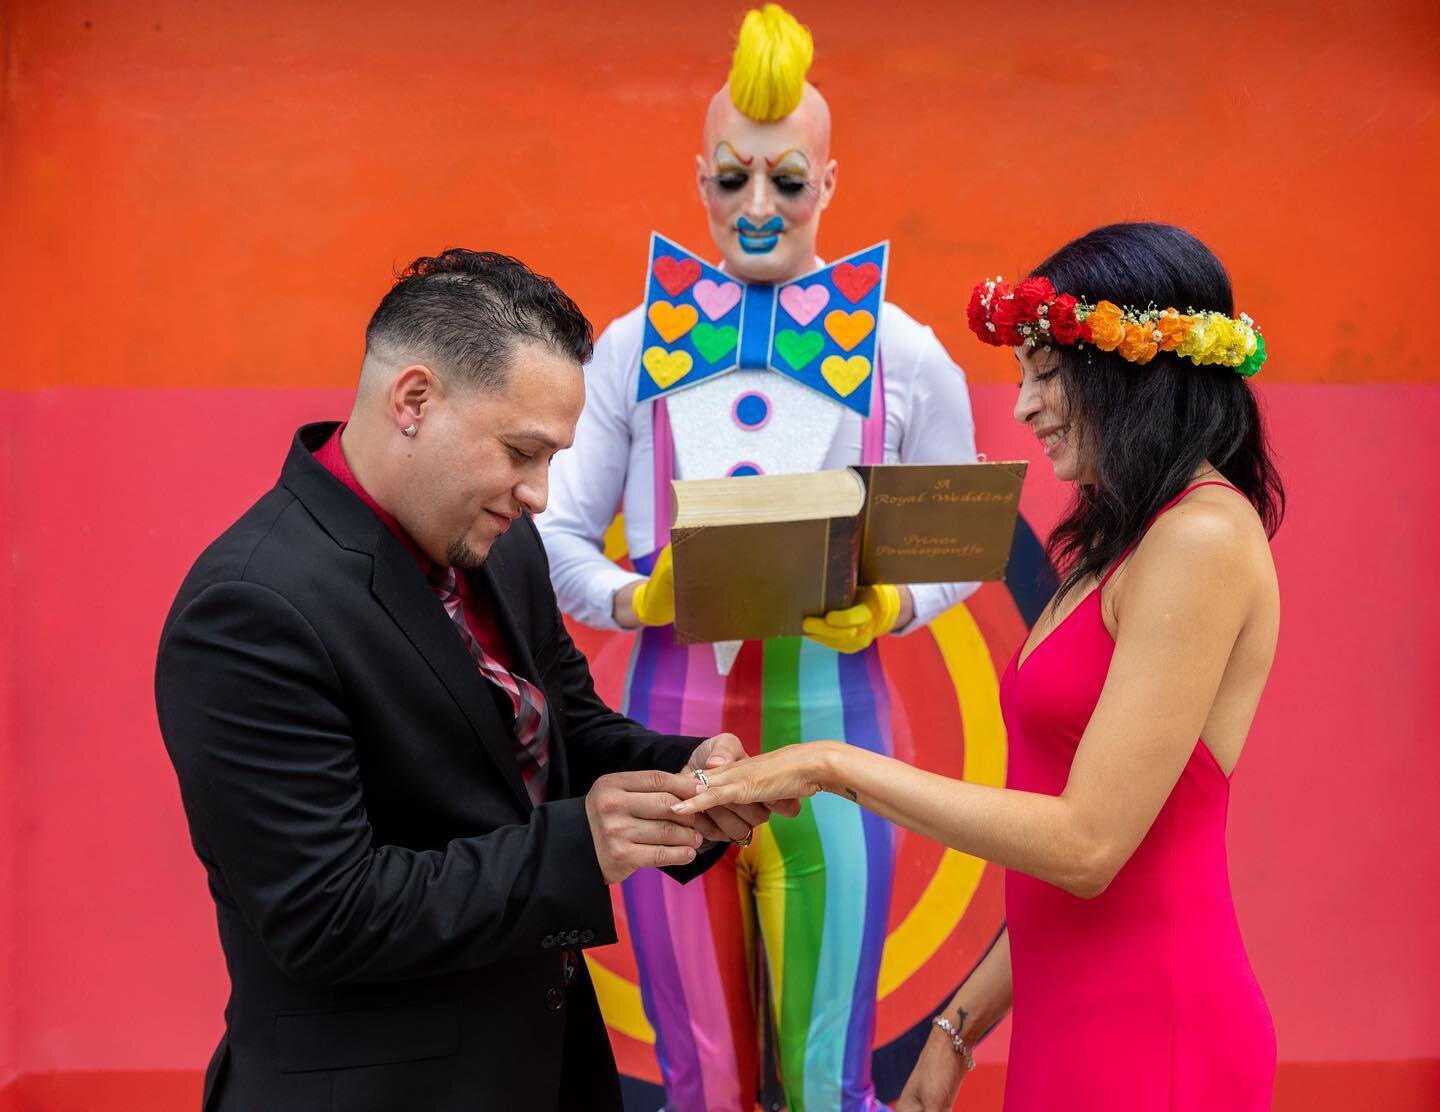 Once again a huge congratulations to all of our &lsquo;Elope With Pride&rsquo; couples who have now been happily married for one glorious week.

We are truly in awe of the magical vibe @princepowderpouffe summoned as he tied the knot! Also what an in